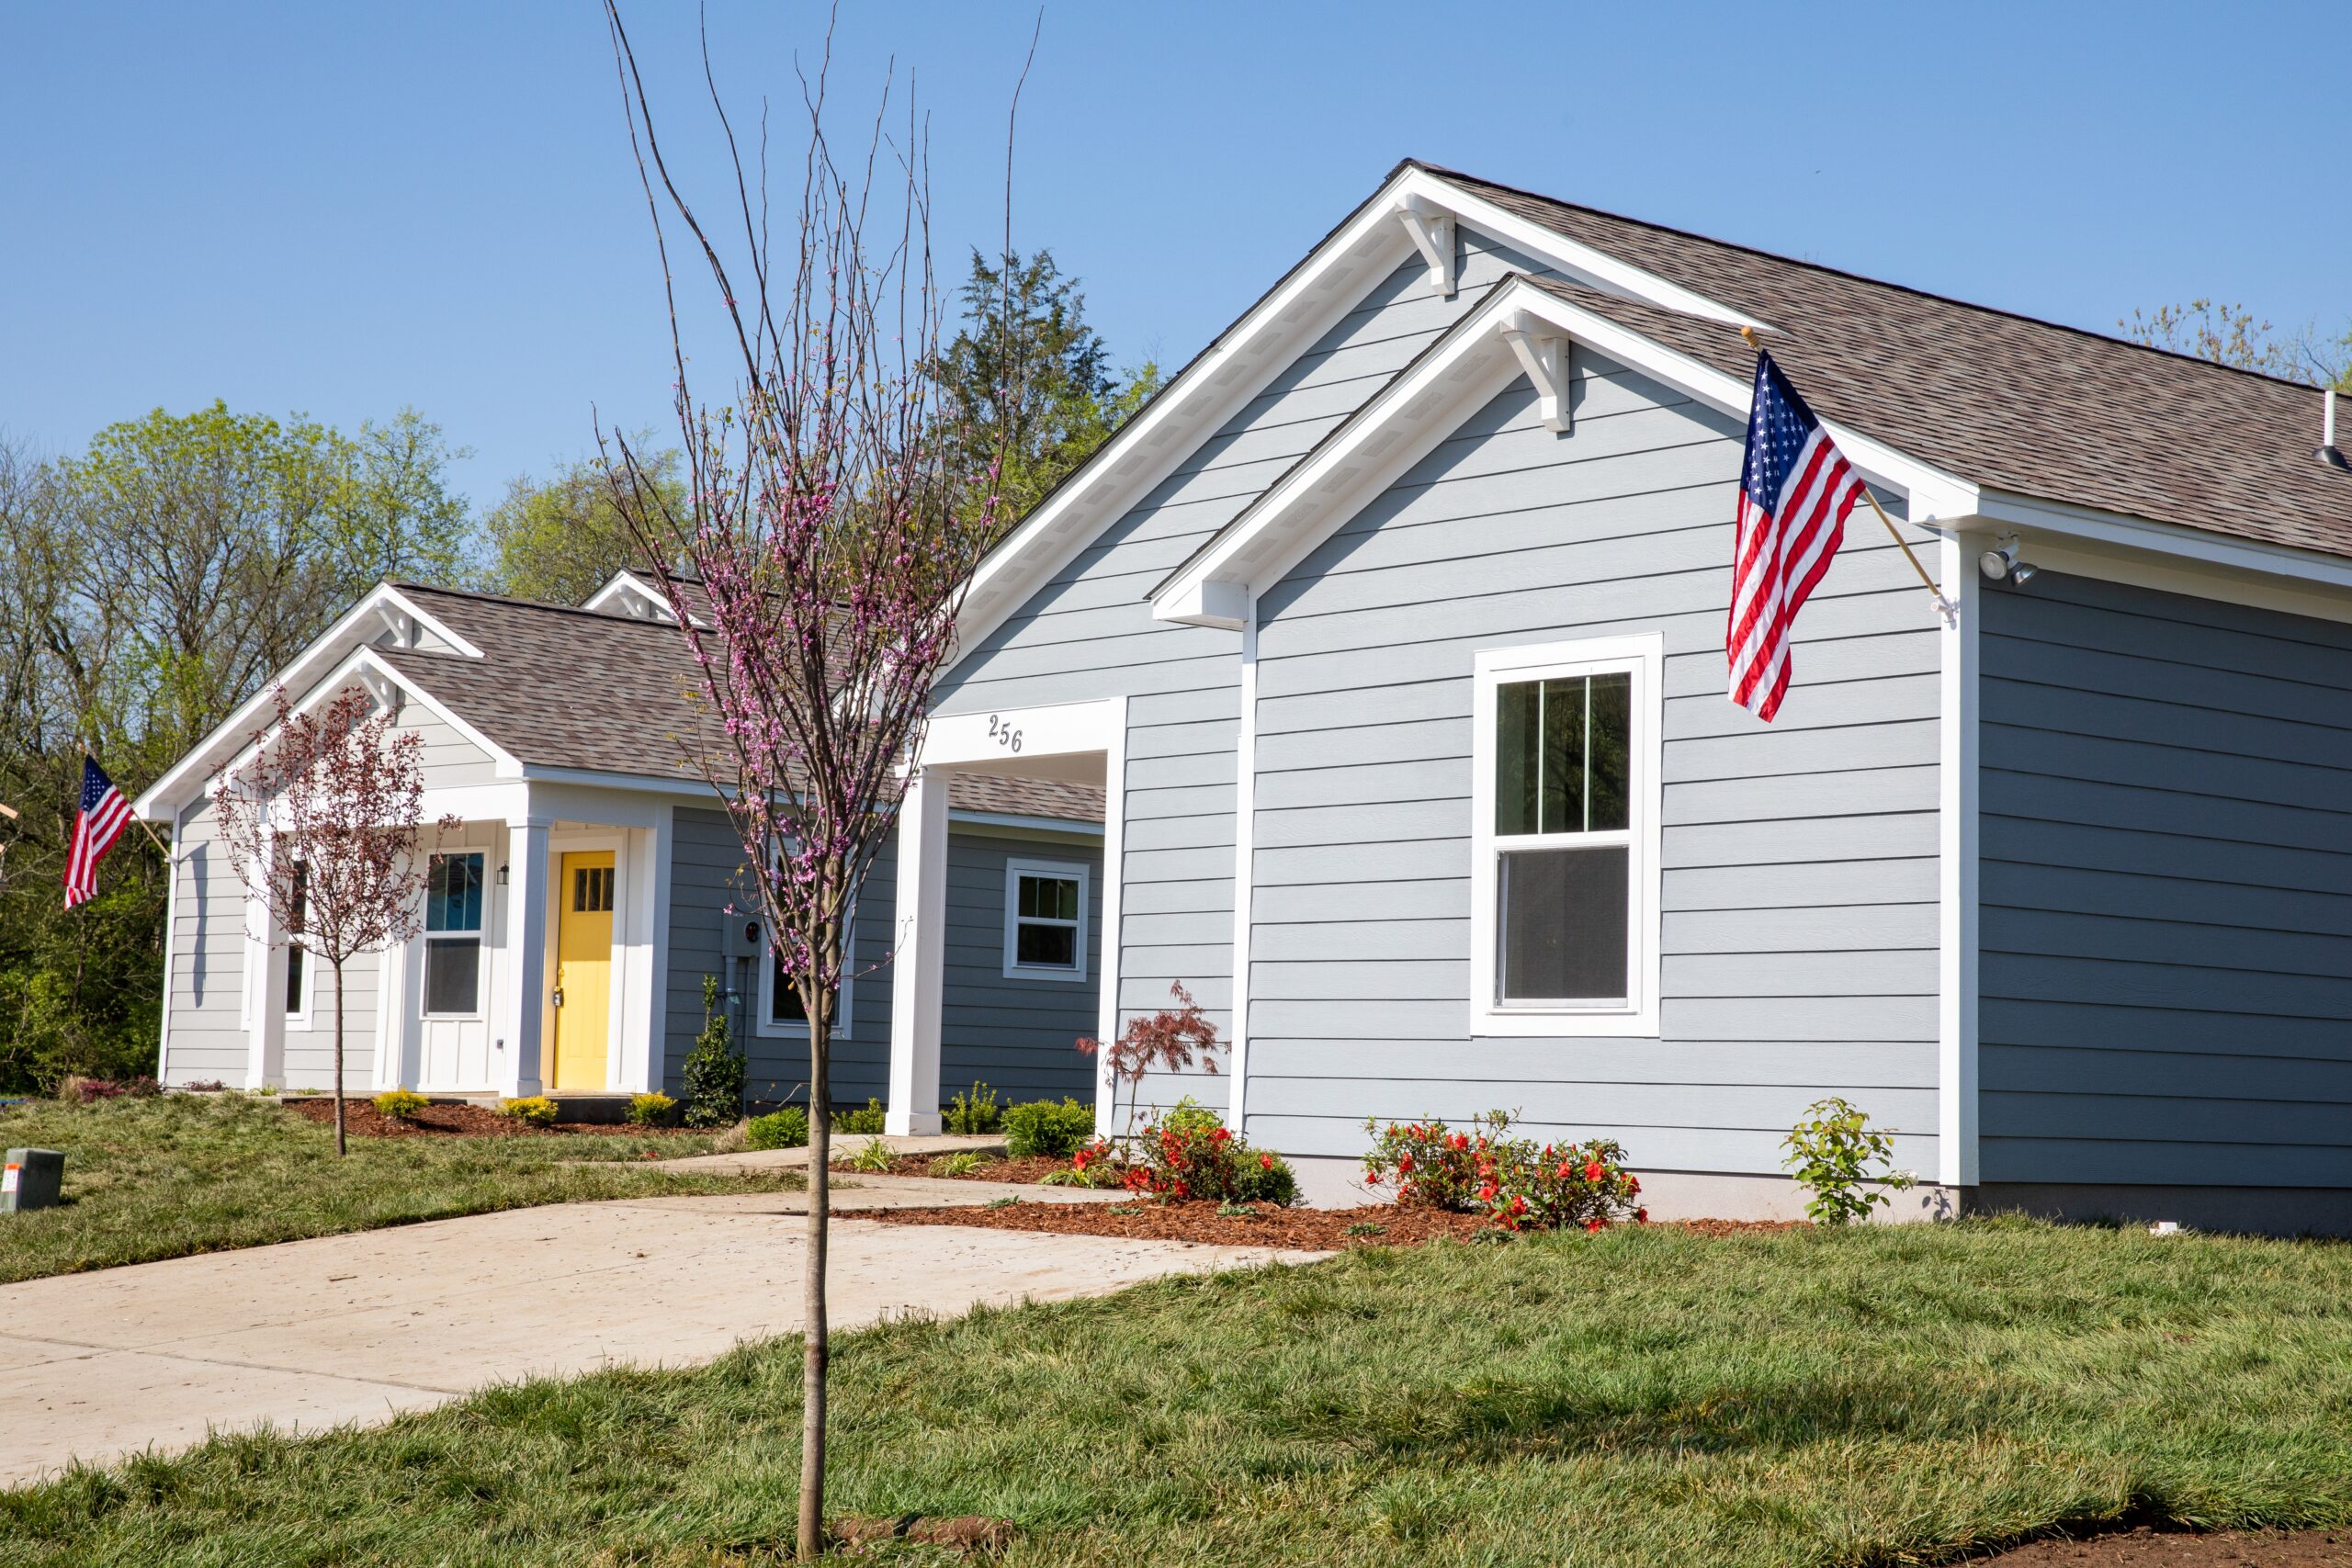 Habitat homes with an American flag flying